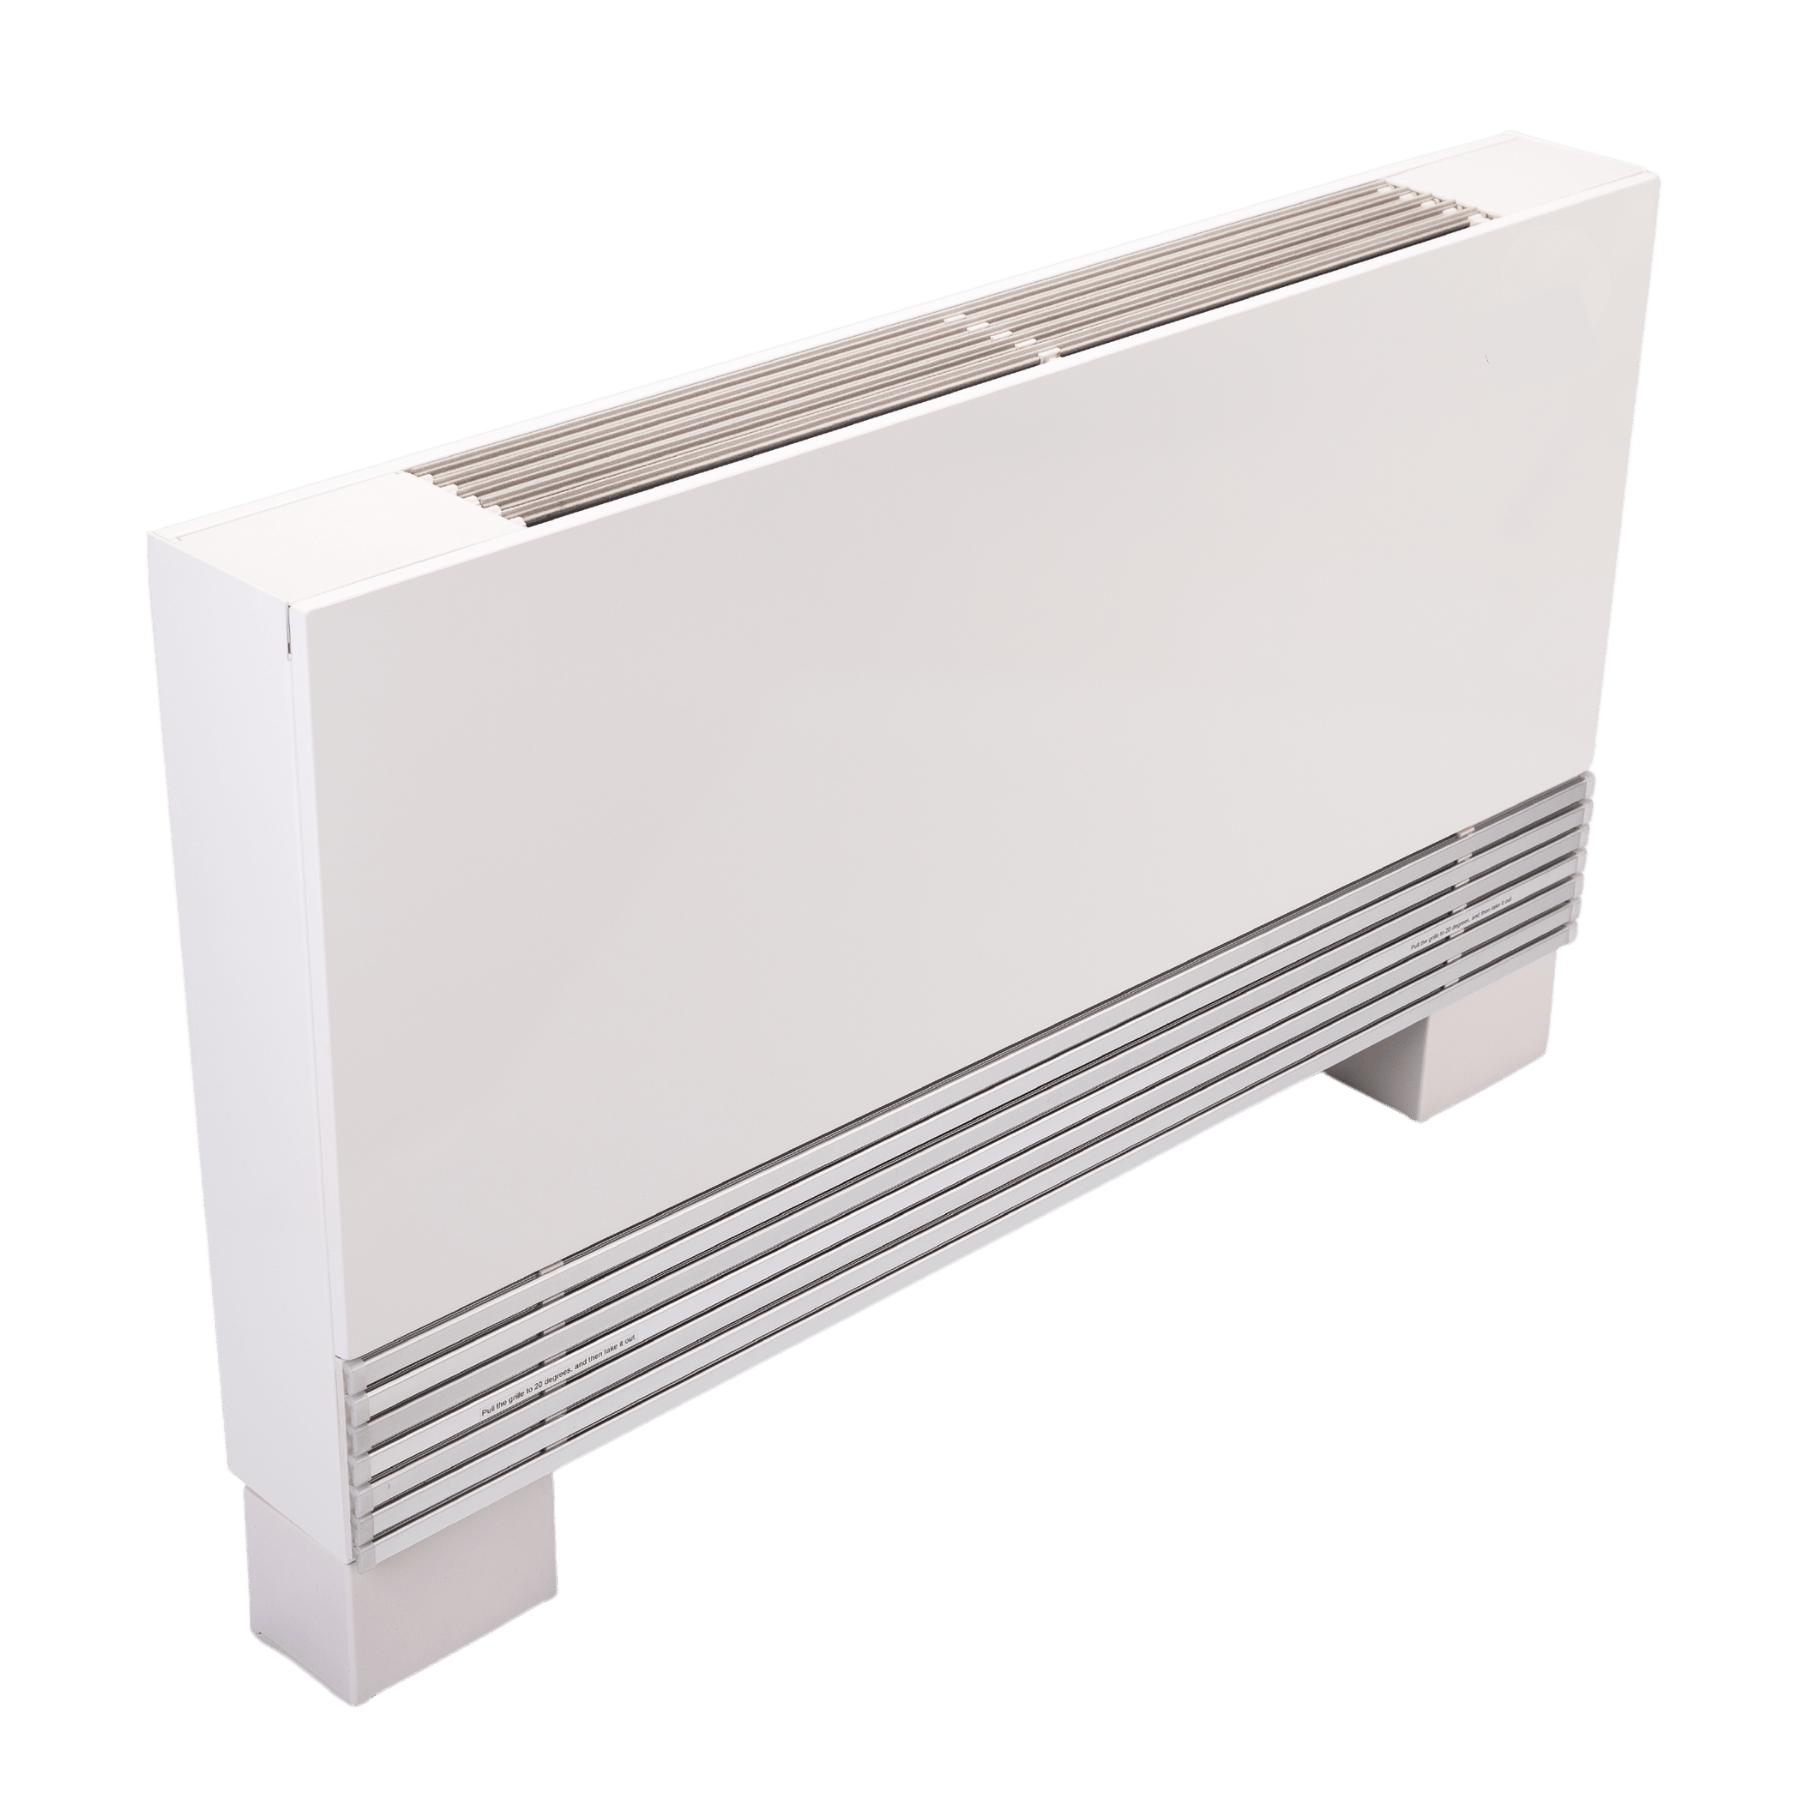 Hydronic Ultra Thin Fan Coil Unit, PFP-050, 2 Pipe System, 120/230V - Capacity 1/2 Ton (Coming Soon)